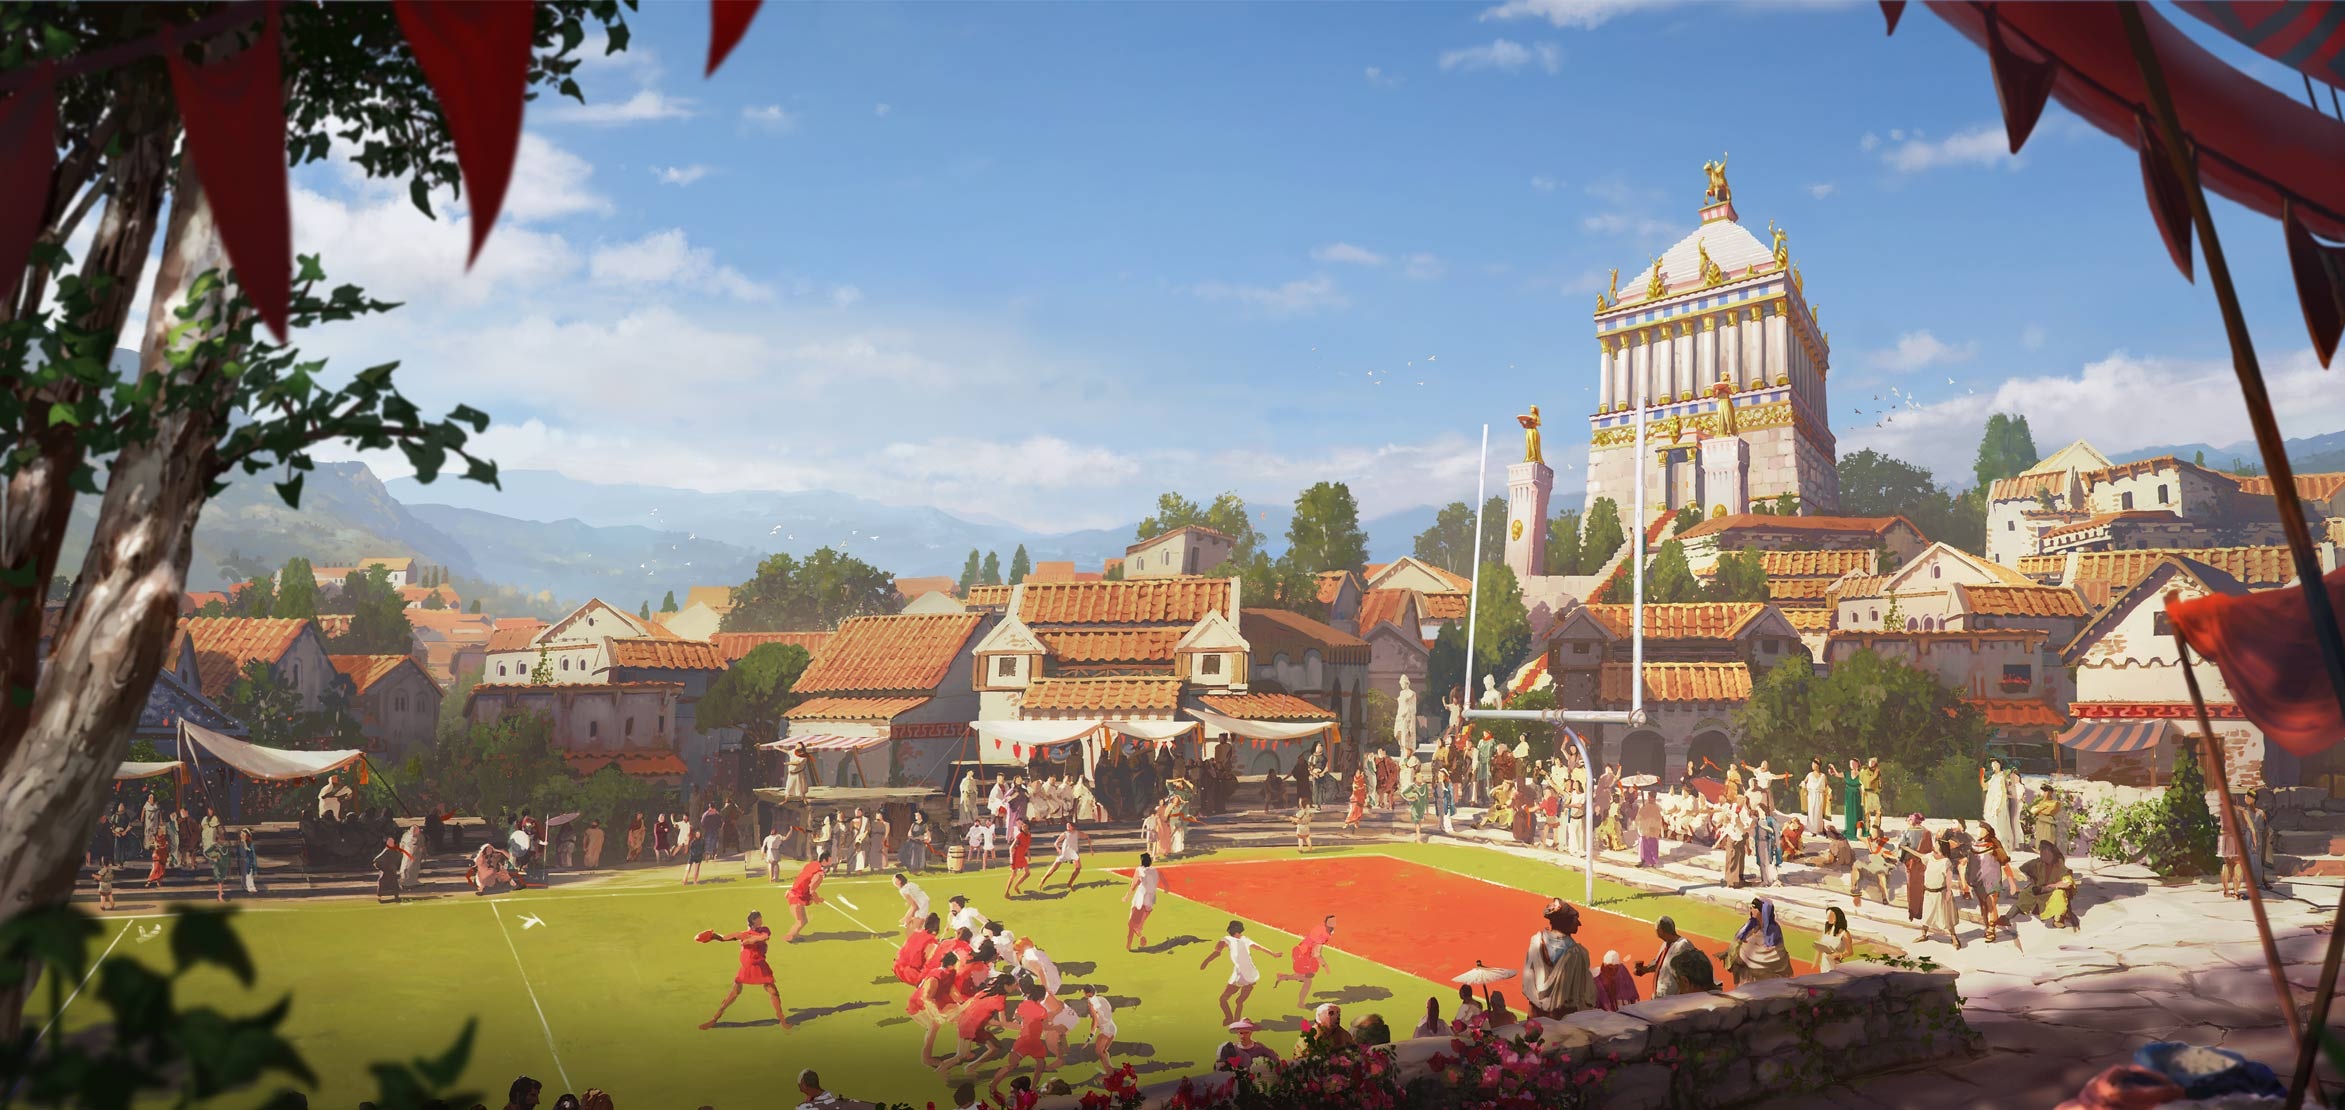 2020 fall event forge of empires